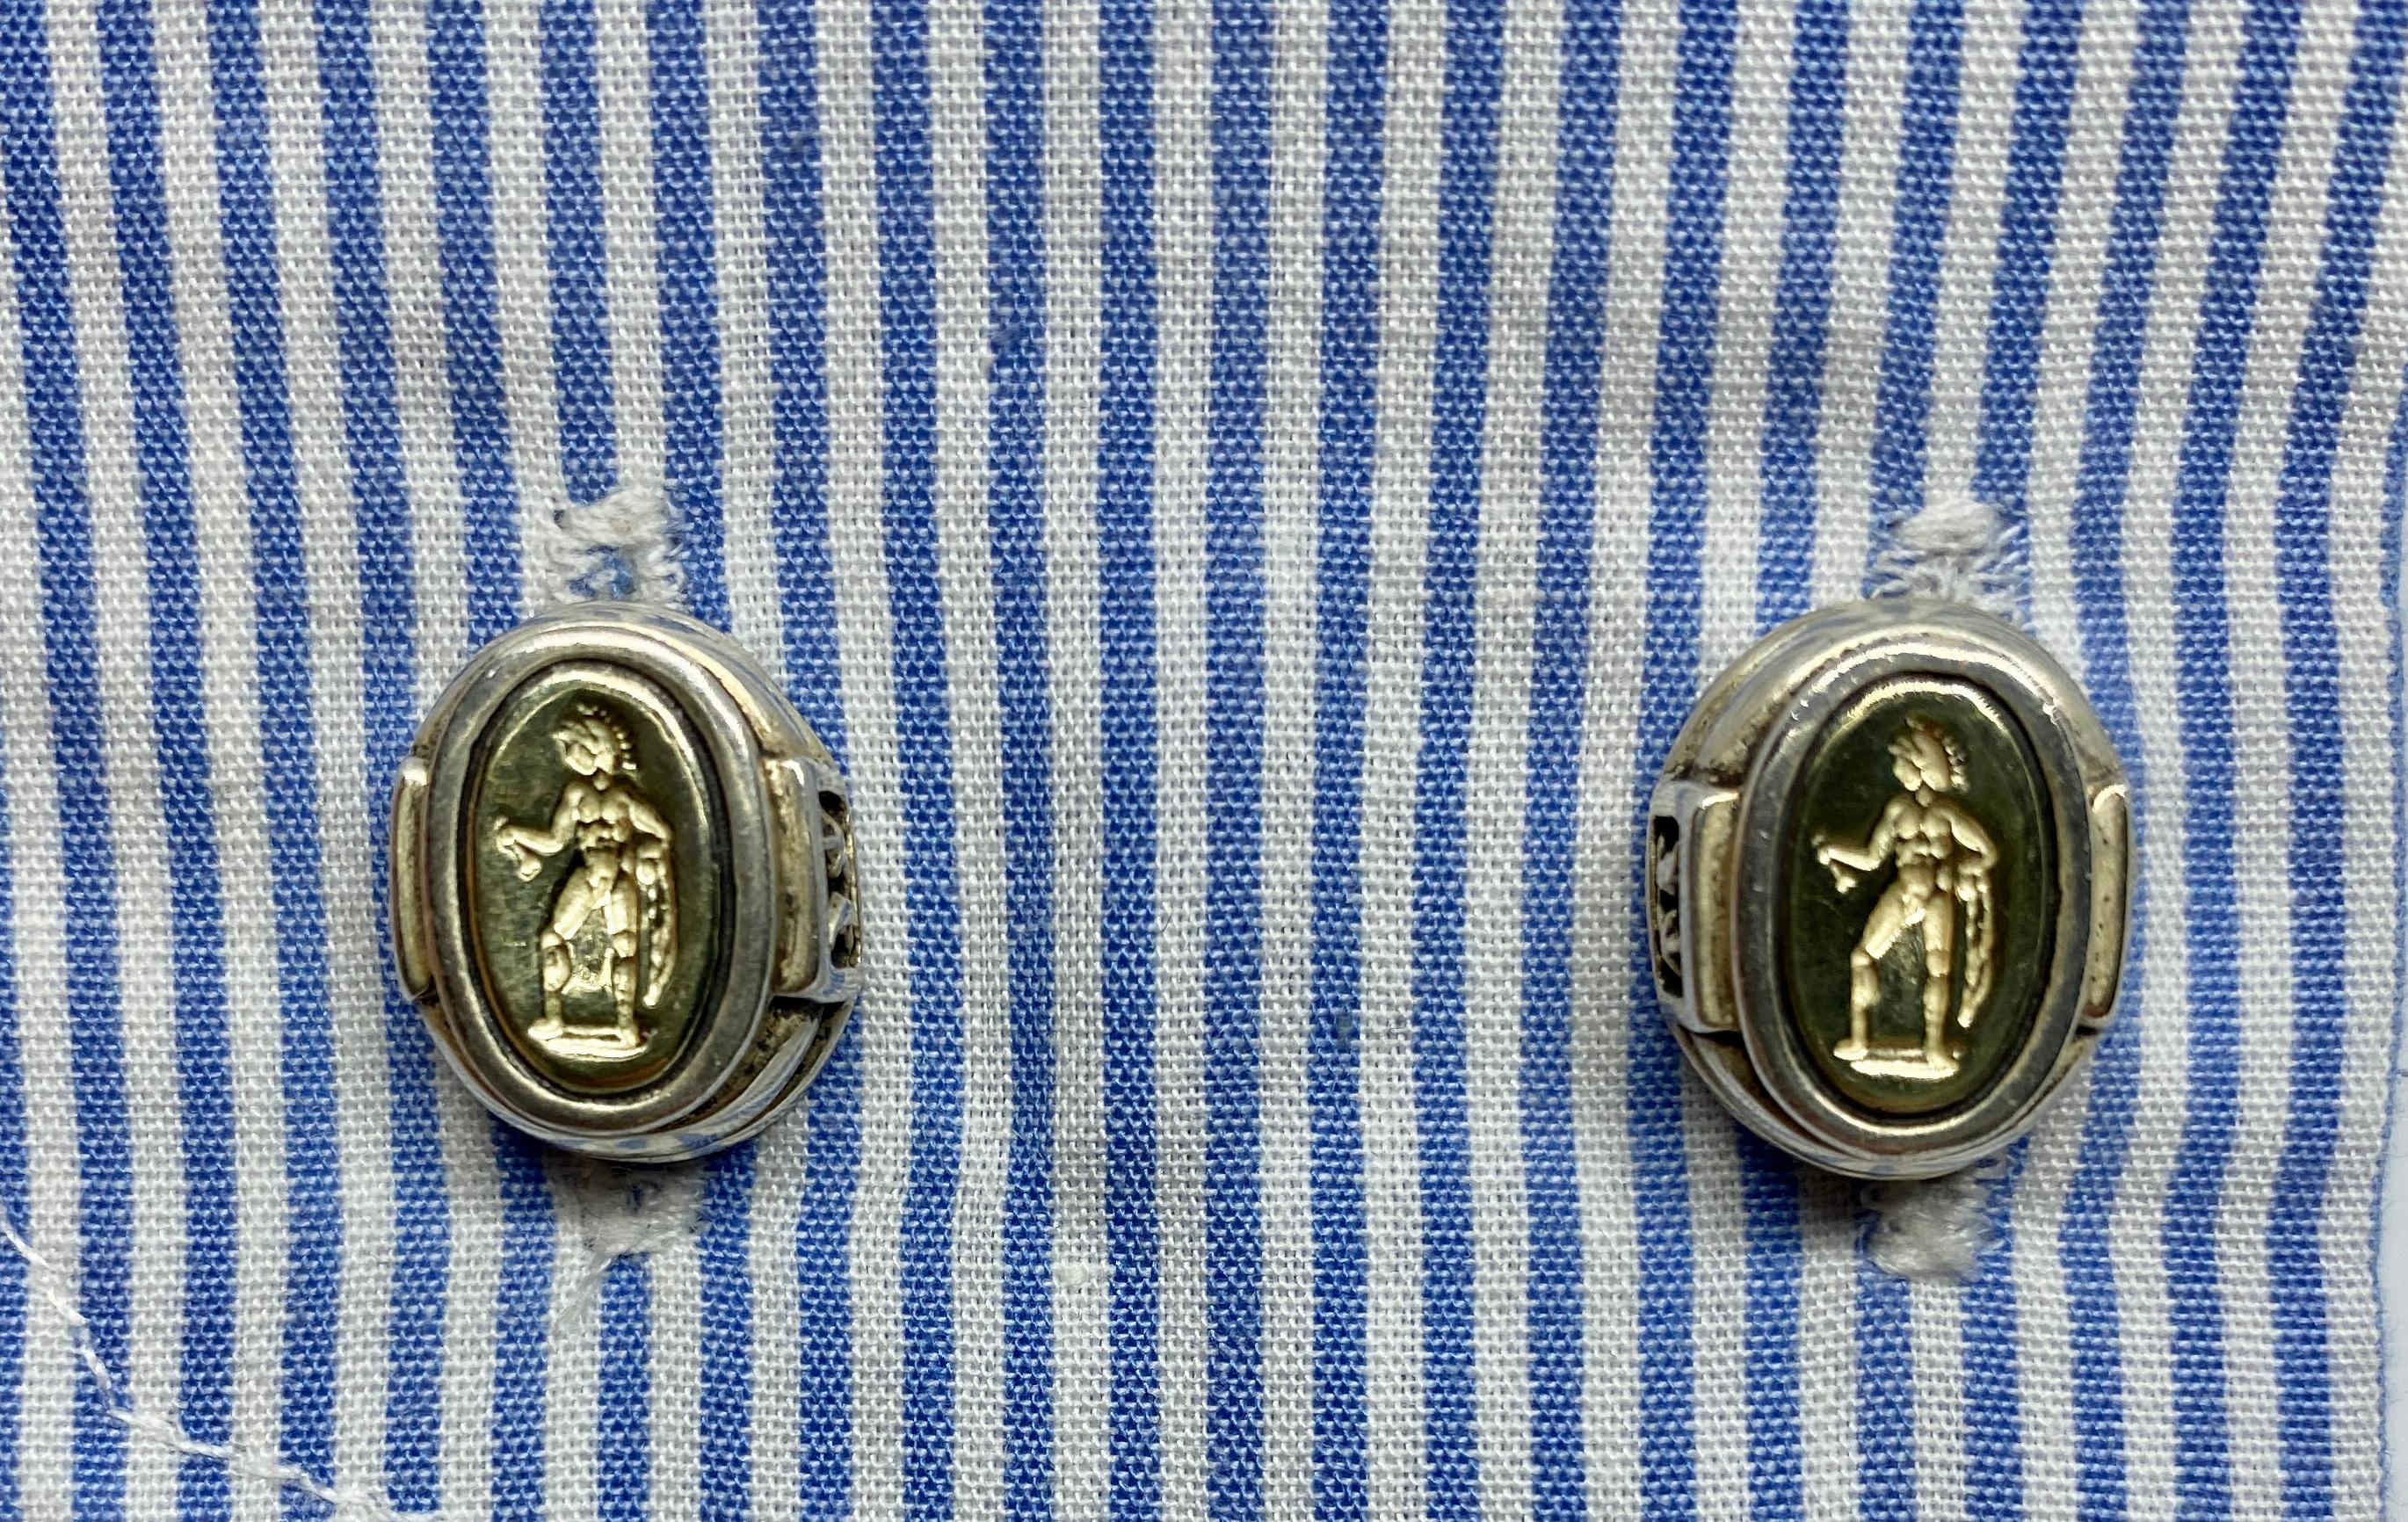 Intaglio Cufflinks in Silver and Gold by Barry Kieselstein-Cord In Good Condition For Sale In San Rafael, CA